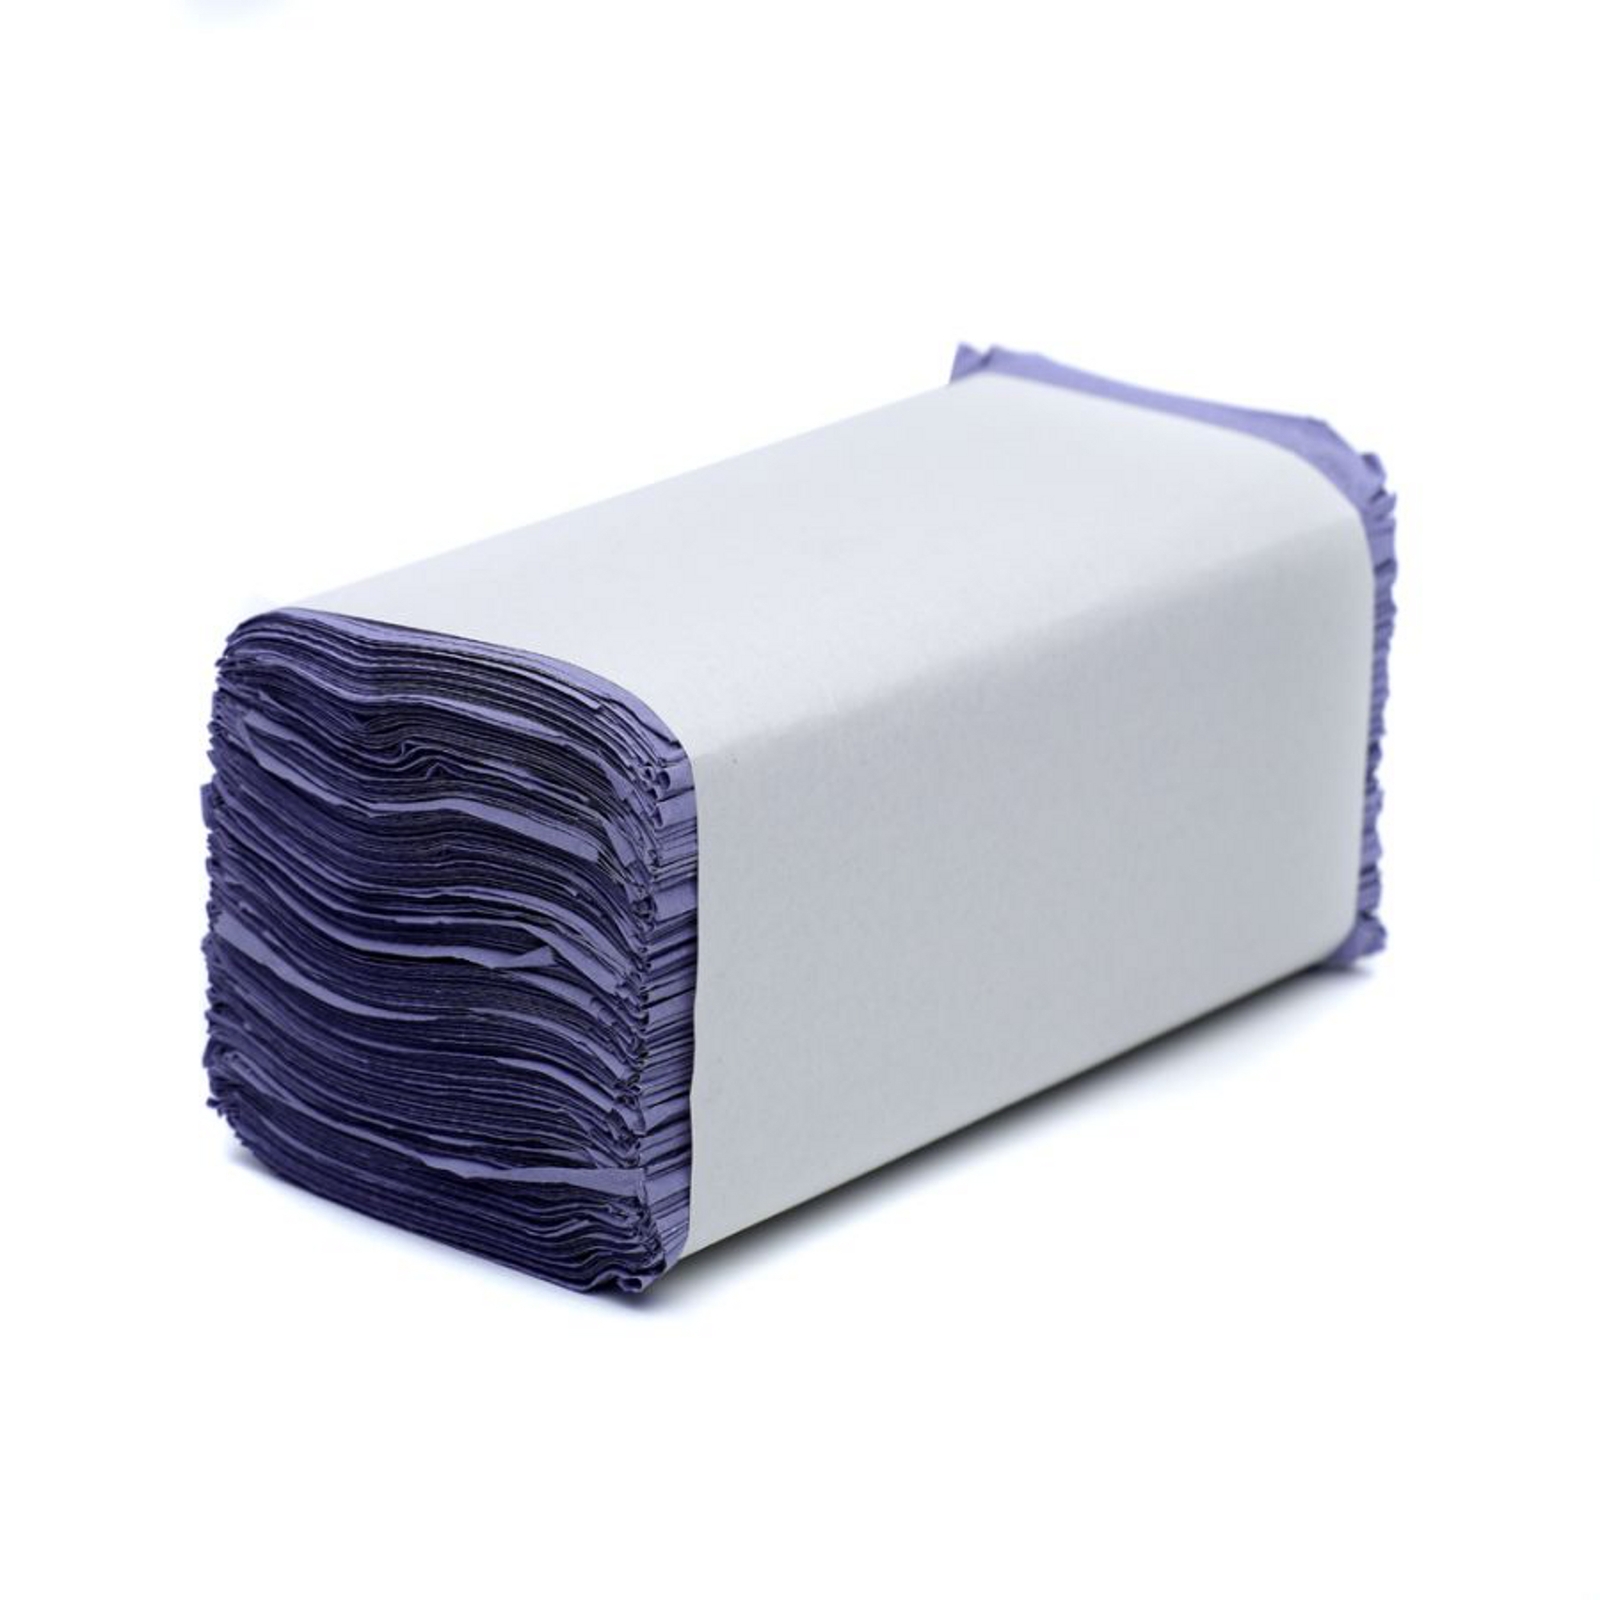 Blue Interfold Hand Towel 1ply